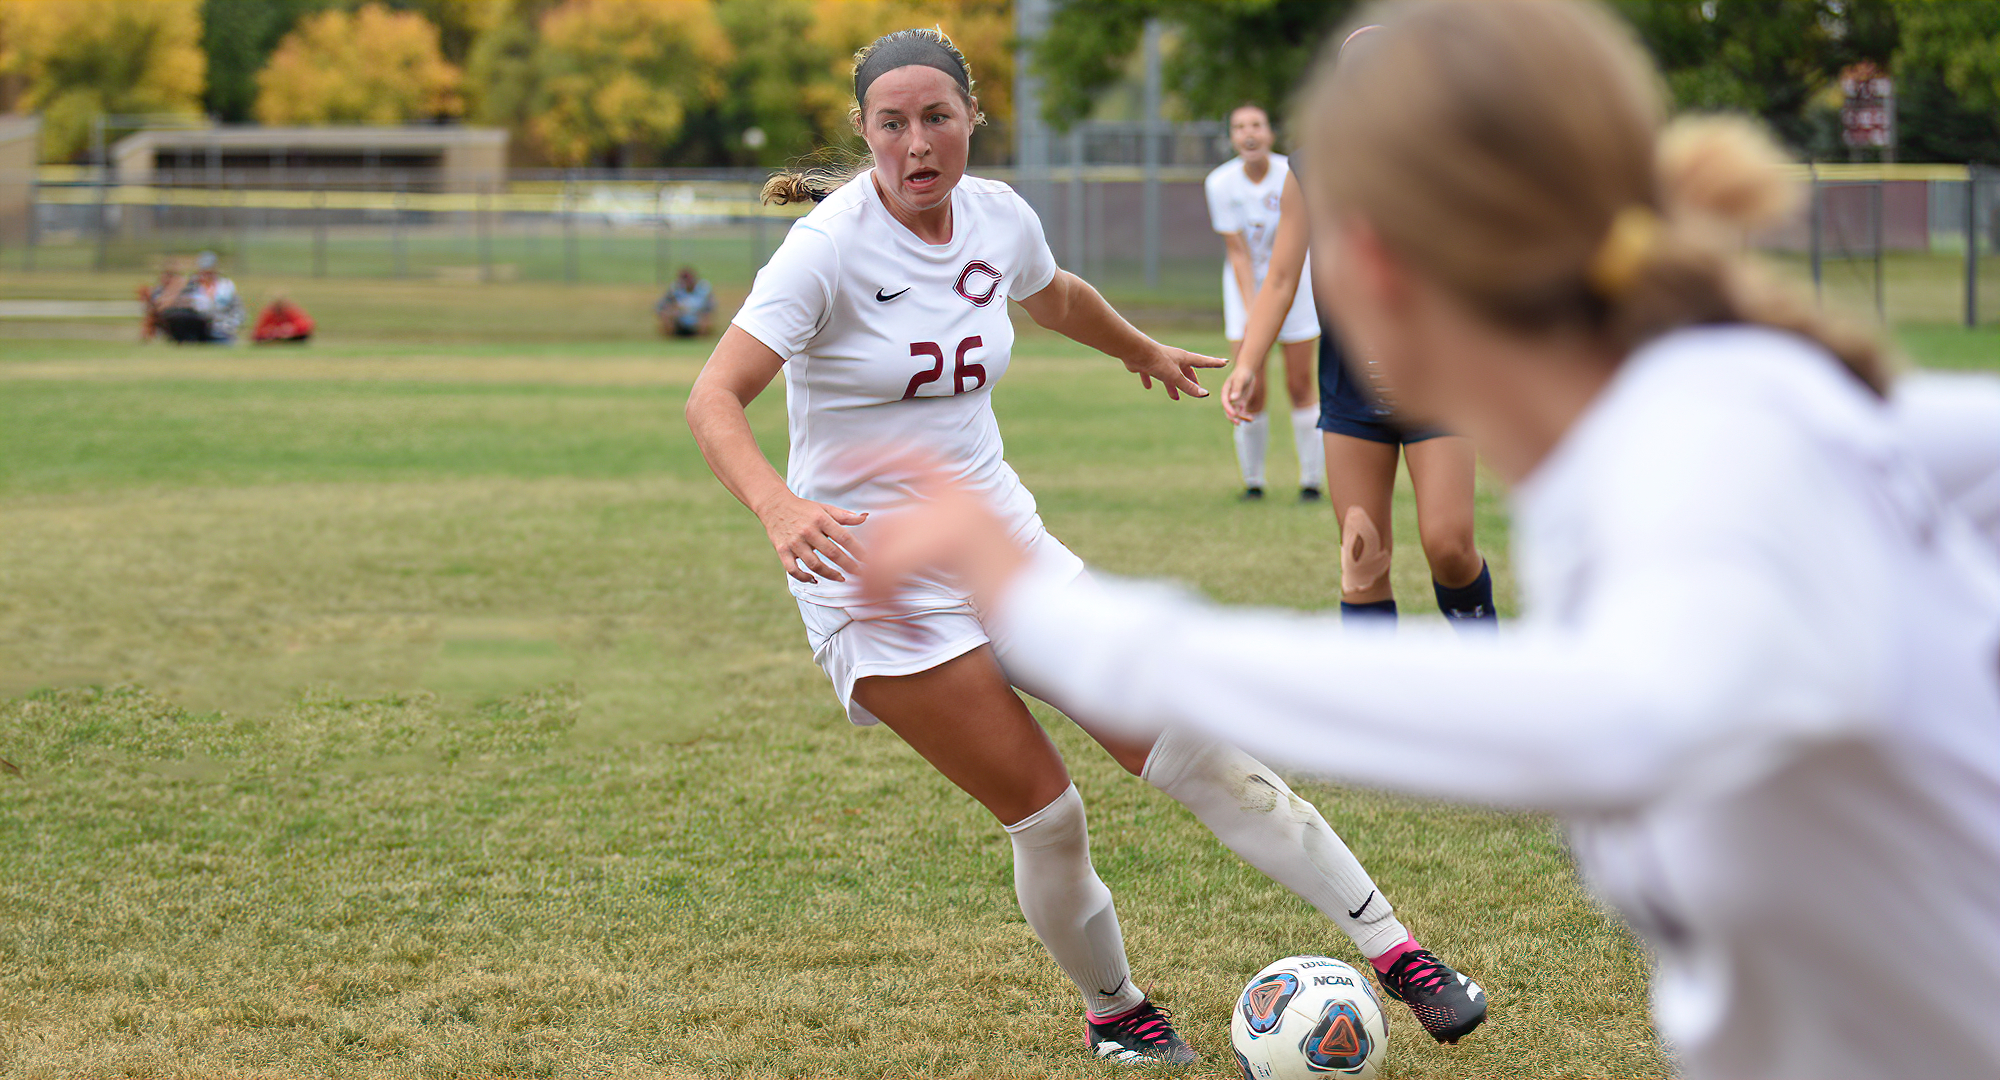 Senior Sophia Robinson scored the game-winning in the Cobbers' 2-1 win at Bethel. The victory moves CC into the final MIAC playoff spot.